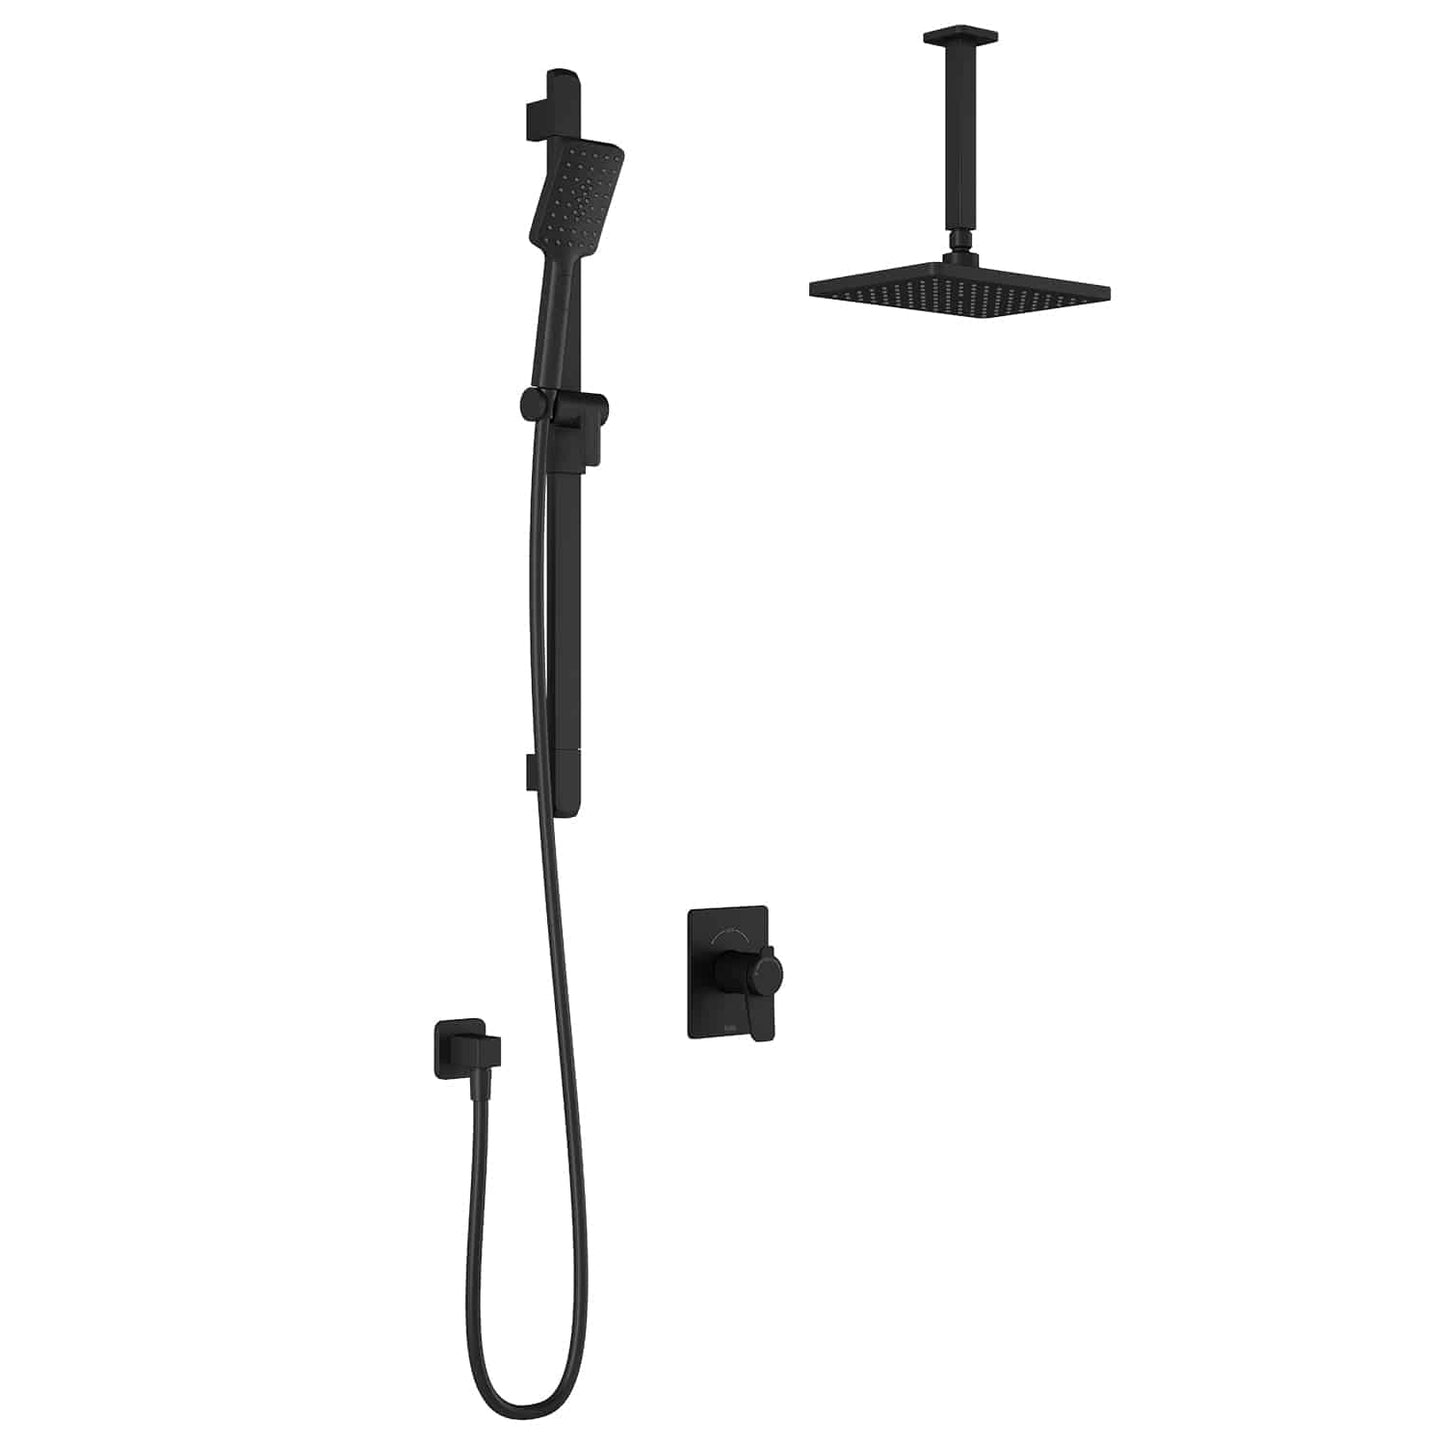 Kalia MOROKA TCD1 (Valve Not Included) AQUATONIK T/P Coaxial Shower System with Vertical Ceiling Arm- Matte Black